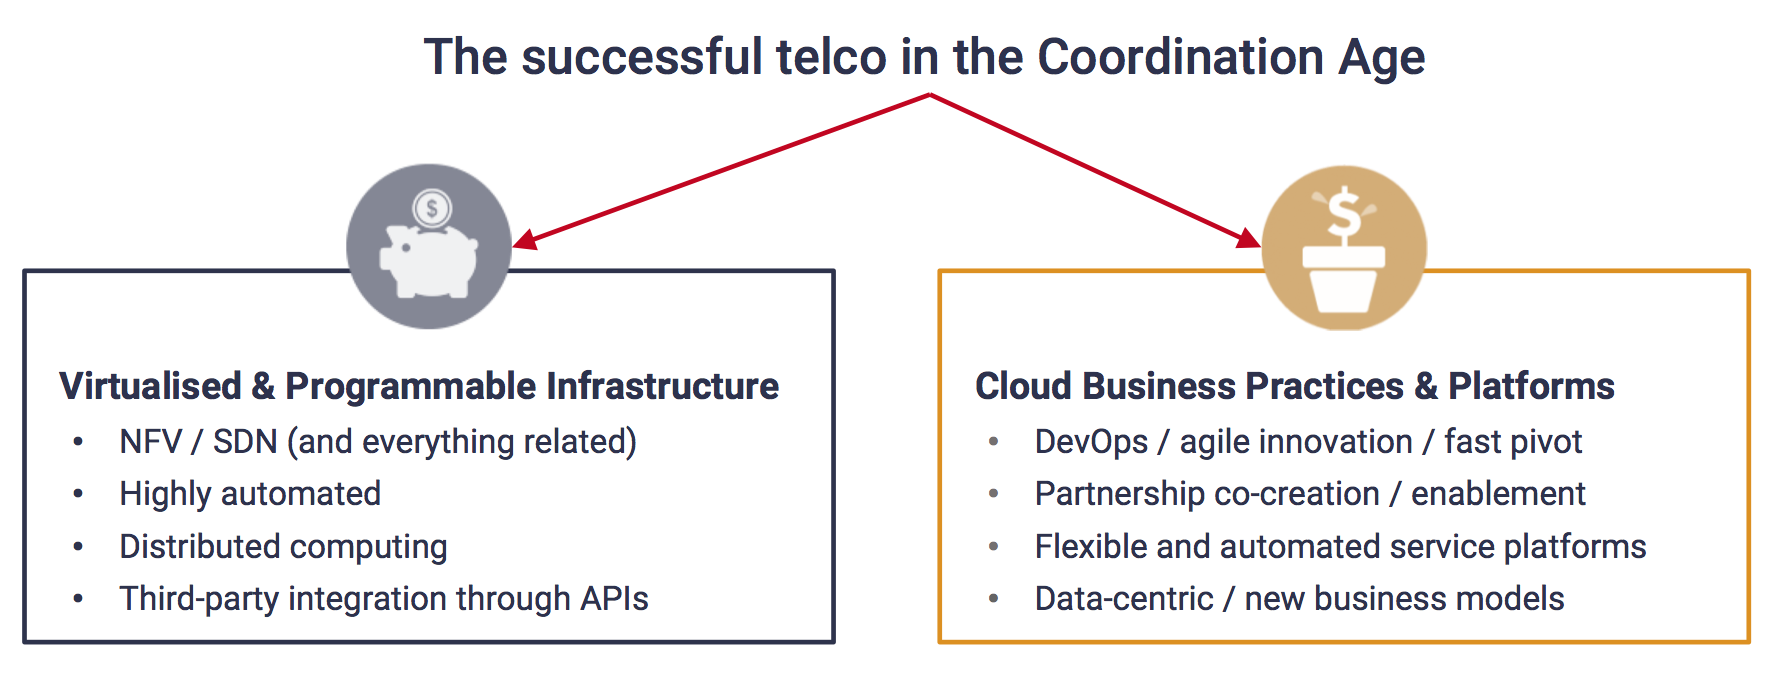 The successful telco in the coordination age